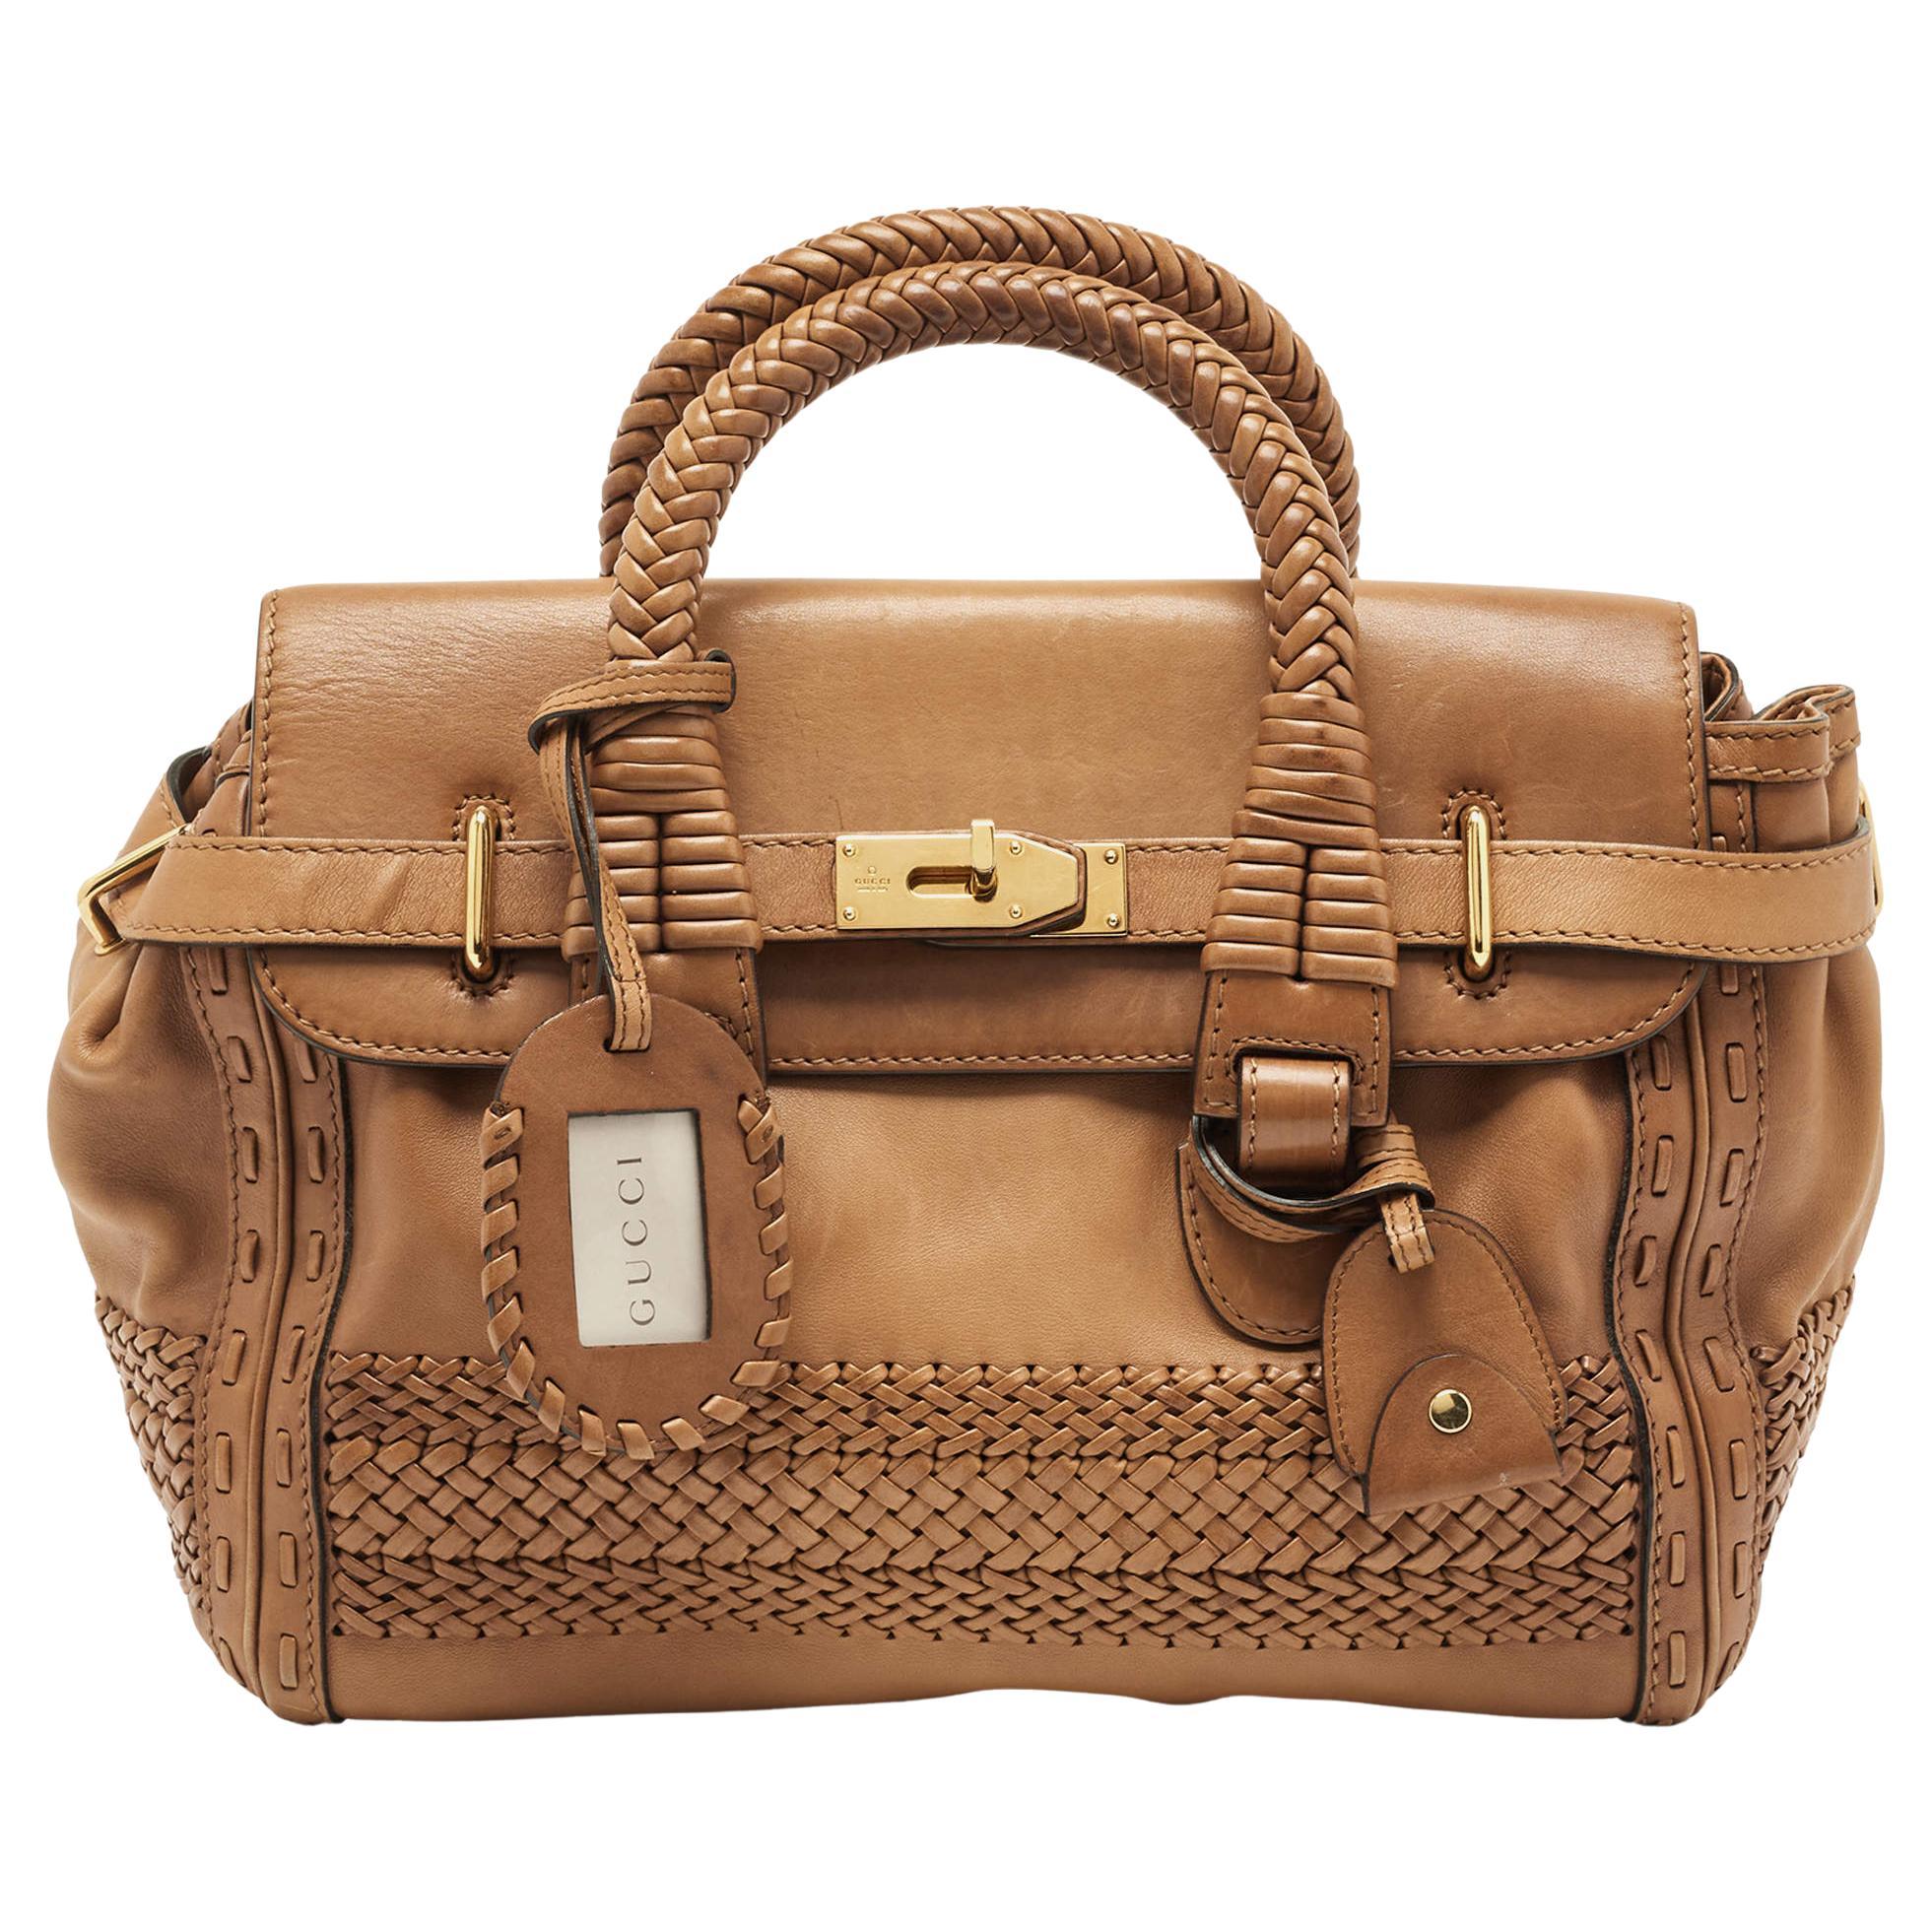 Gucci Brown Leather Handmade Top Handle Bag For Sale